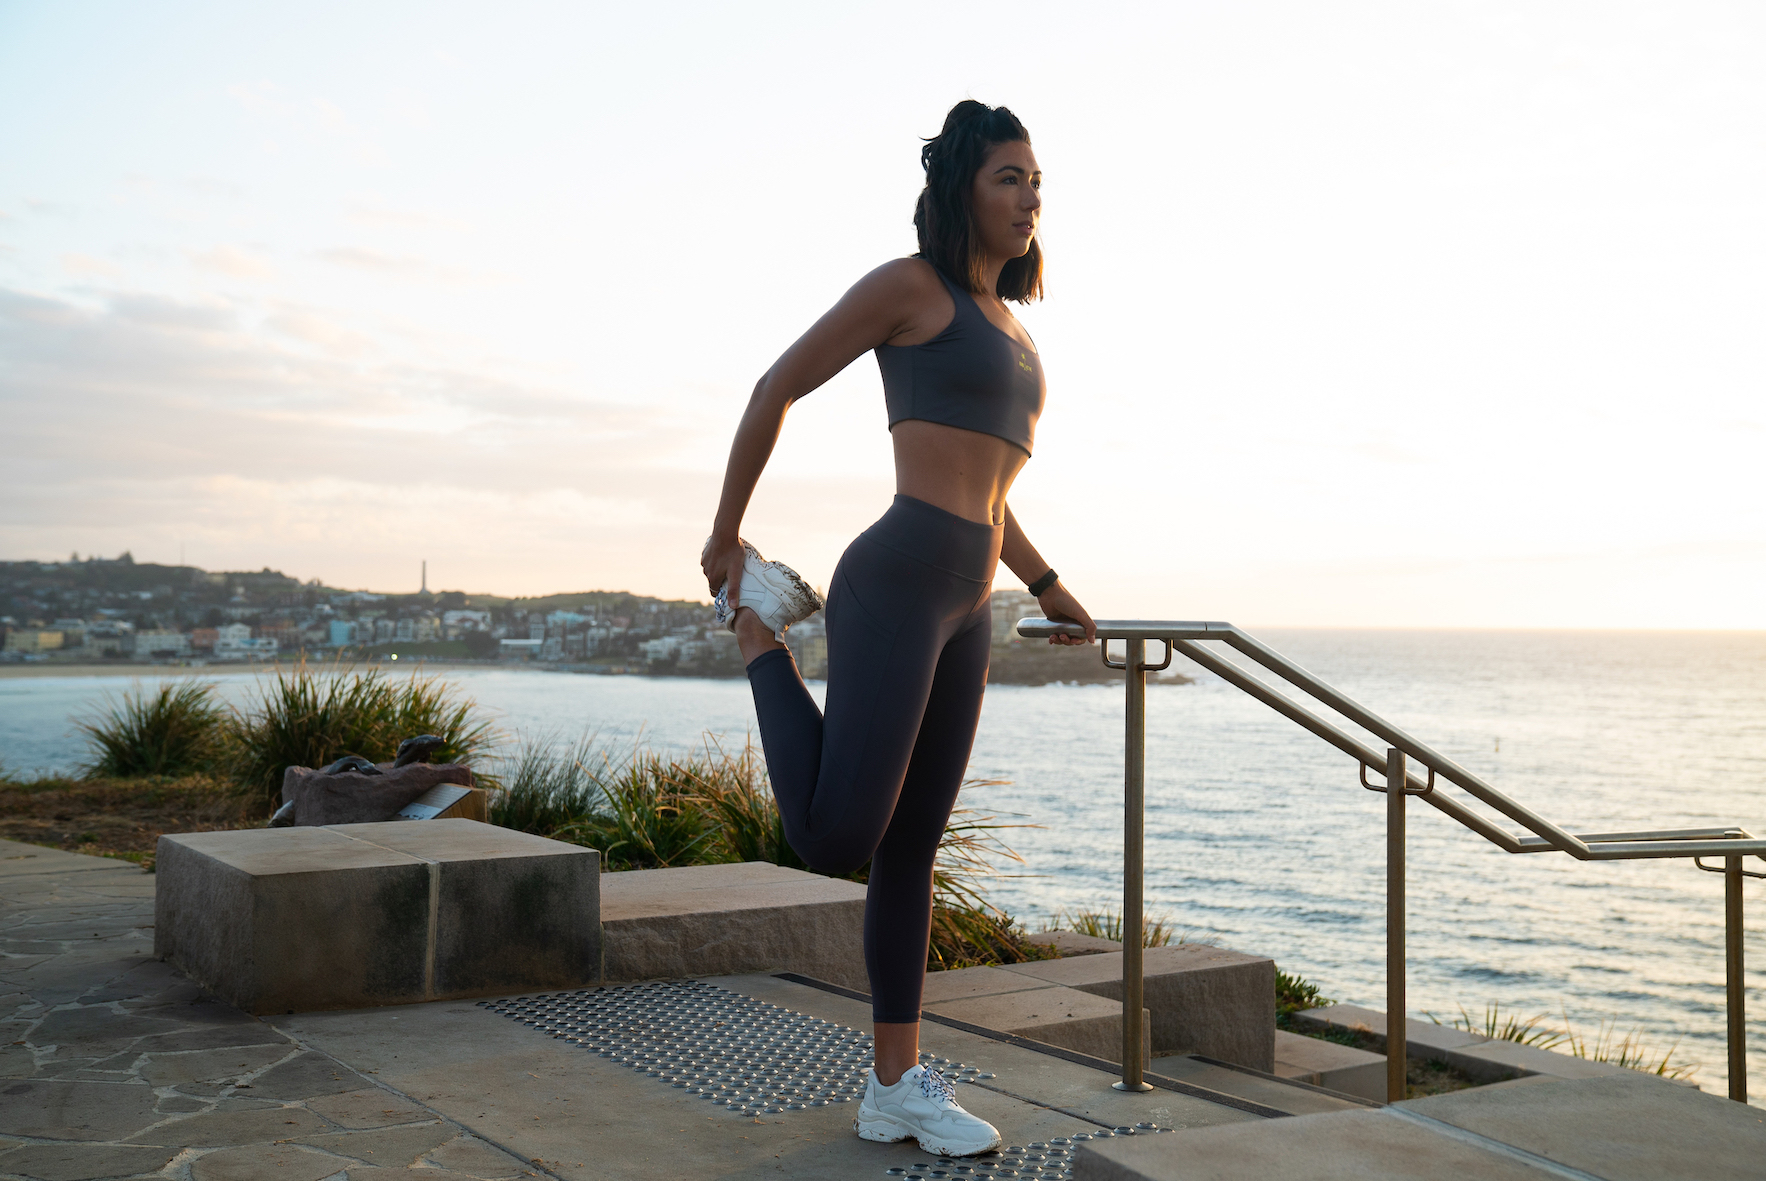 How To Get Motivation For Fitness - with BARE FIT CO